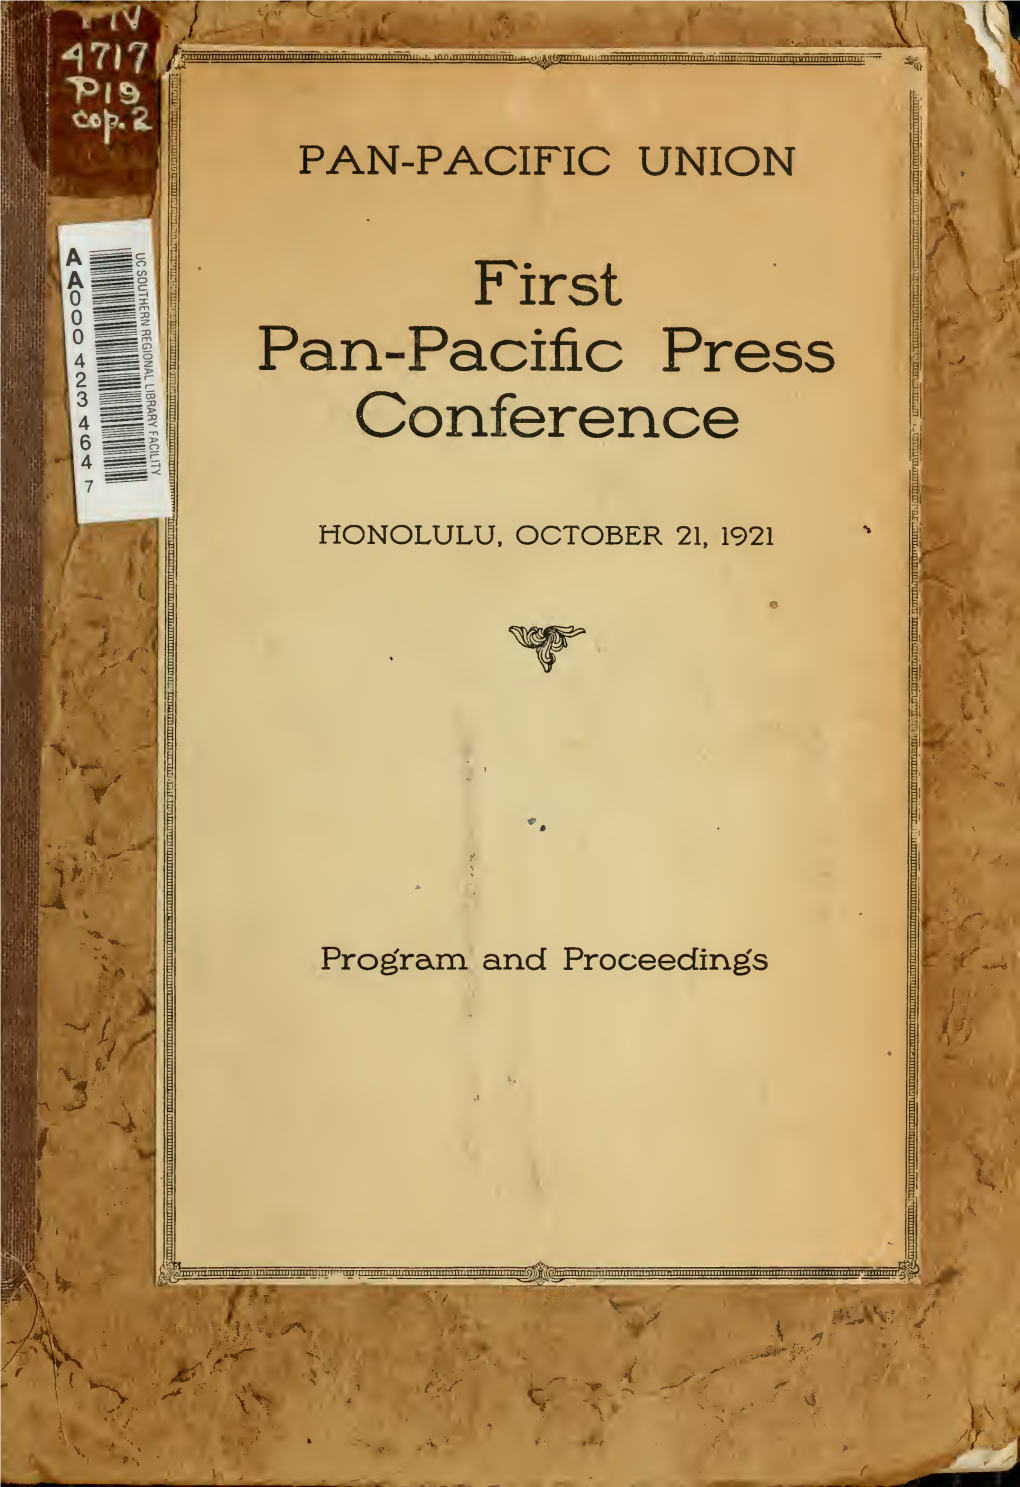 Program and Proceedings; First Pan-Pacific Press Conference, A